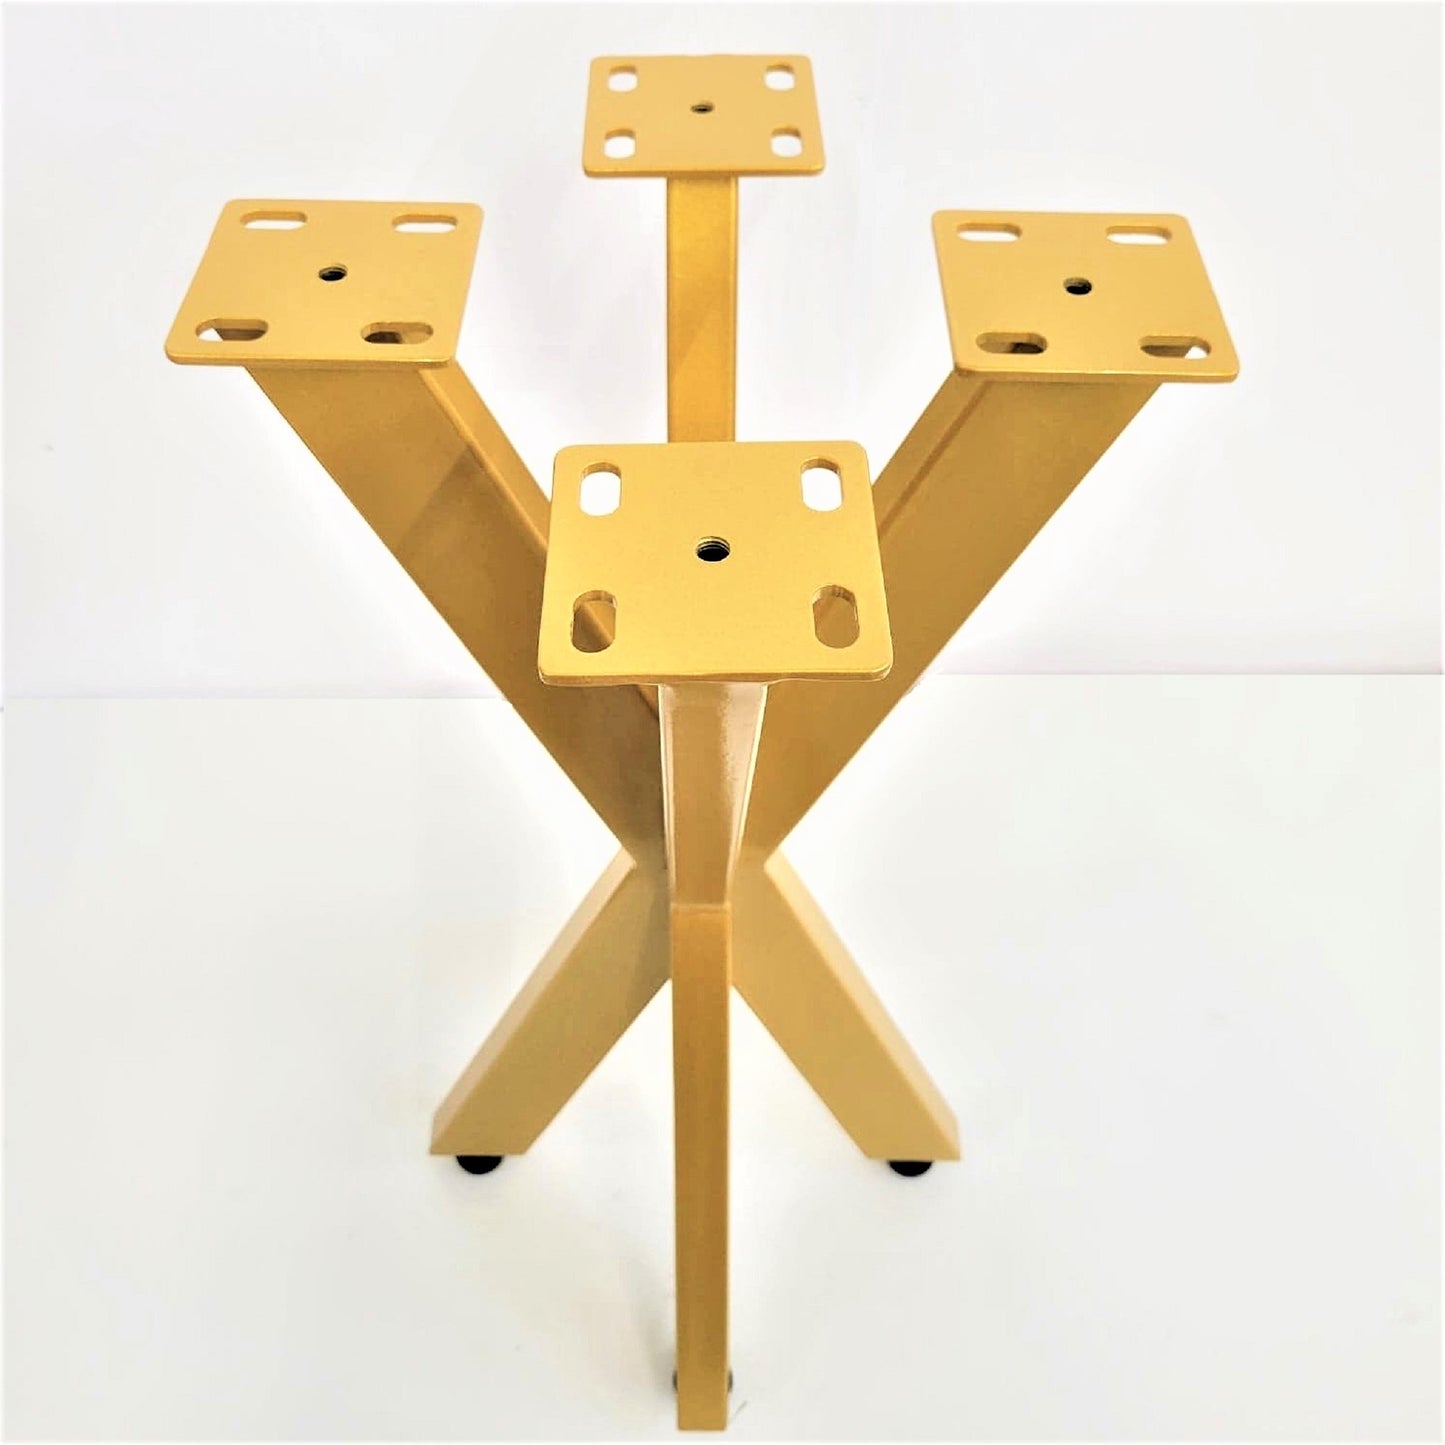 Spider Gold End Table Legs, Spider Gold Furniture Legs, Furniture Feet, Spider Metal Legs, Spider Steel Table Legs, Bench Legs, Metal Bench Base, Heavy Duty Bench Legs, Heavy Duty Bench Base